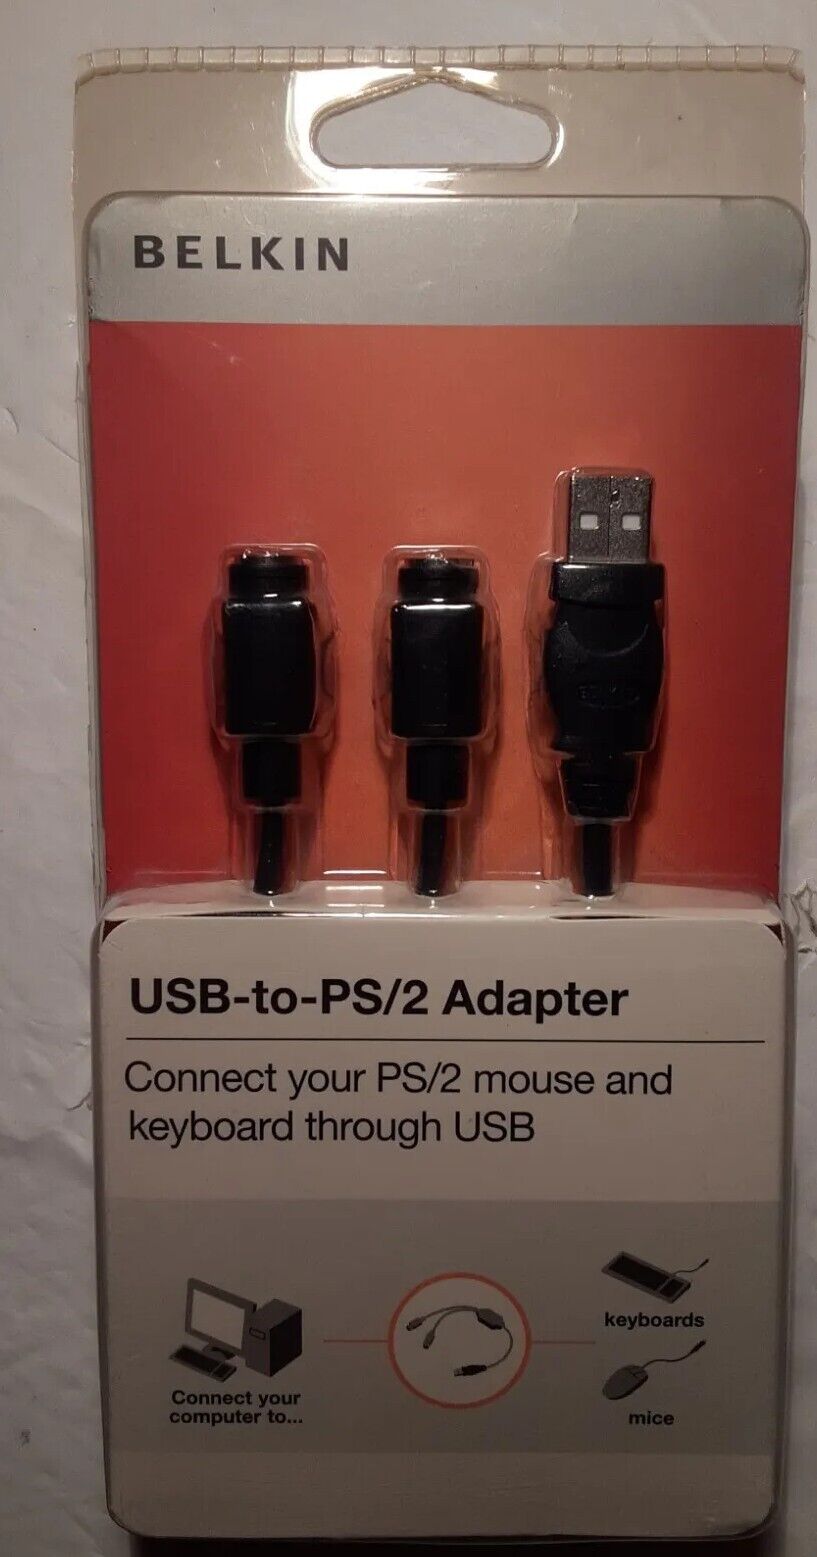 Belkin USB to PS/2 Adapter Connects PS/2 Mouse & Keyboard through USB